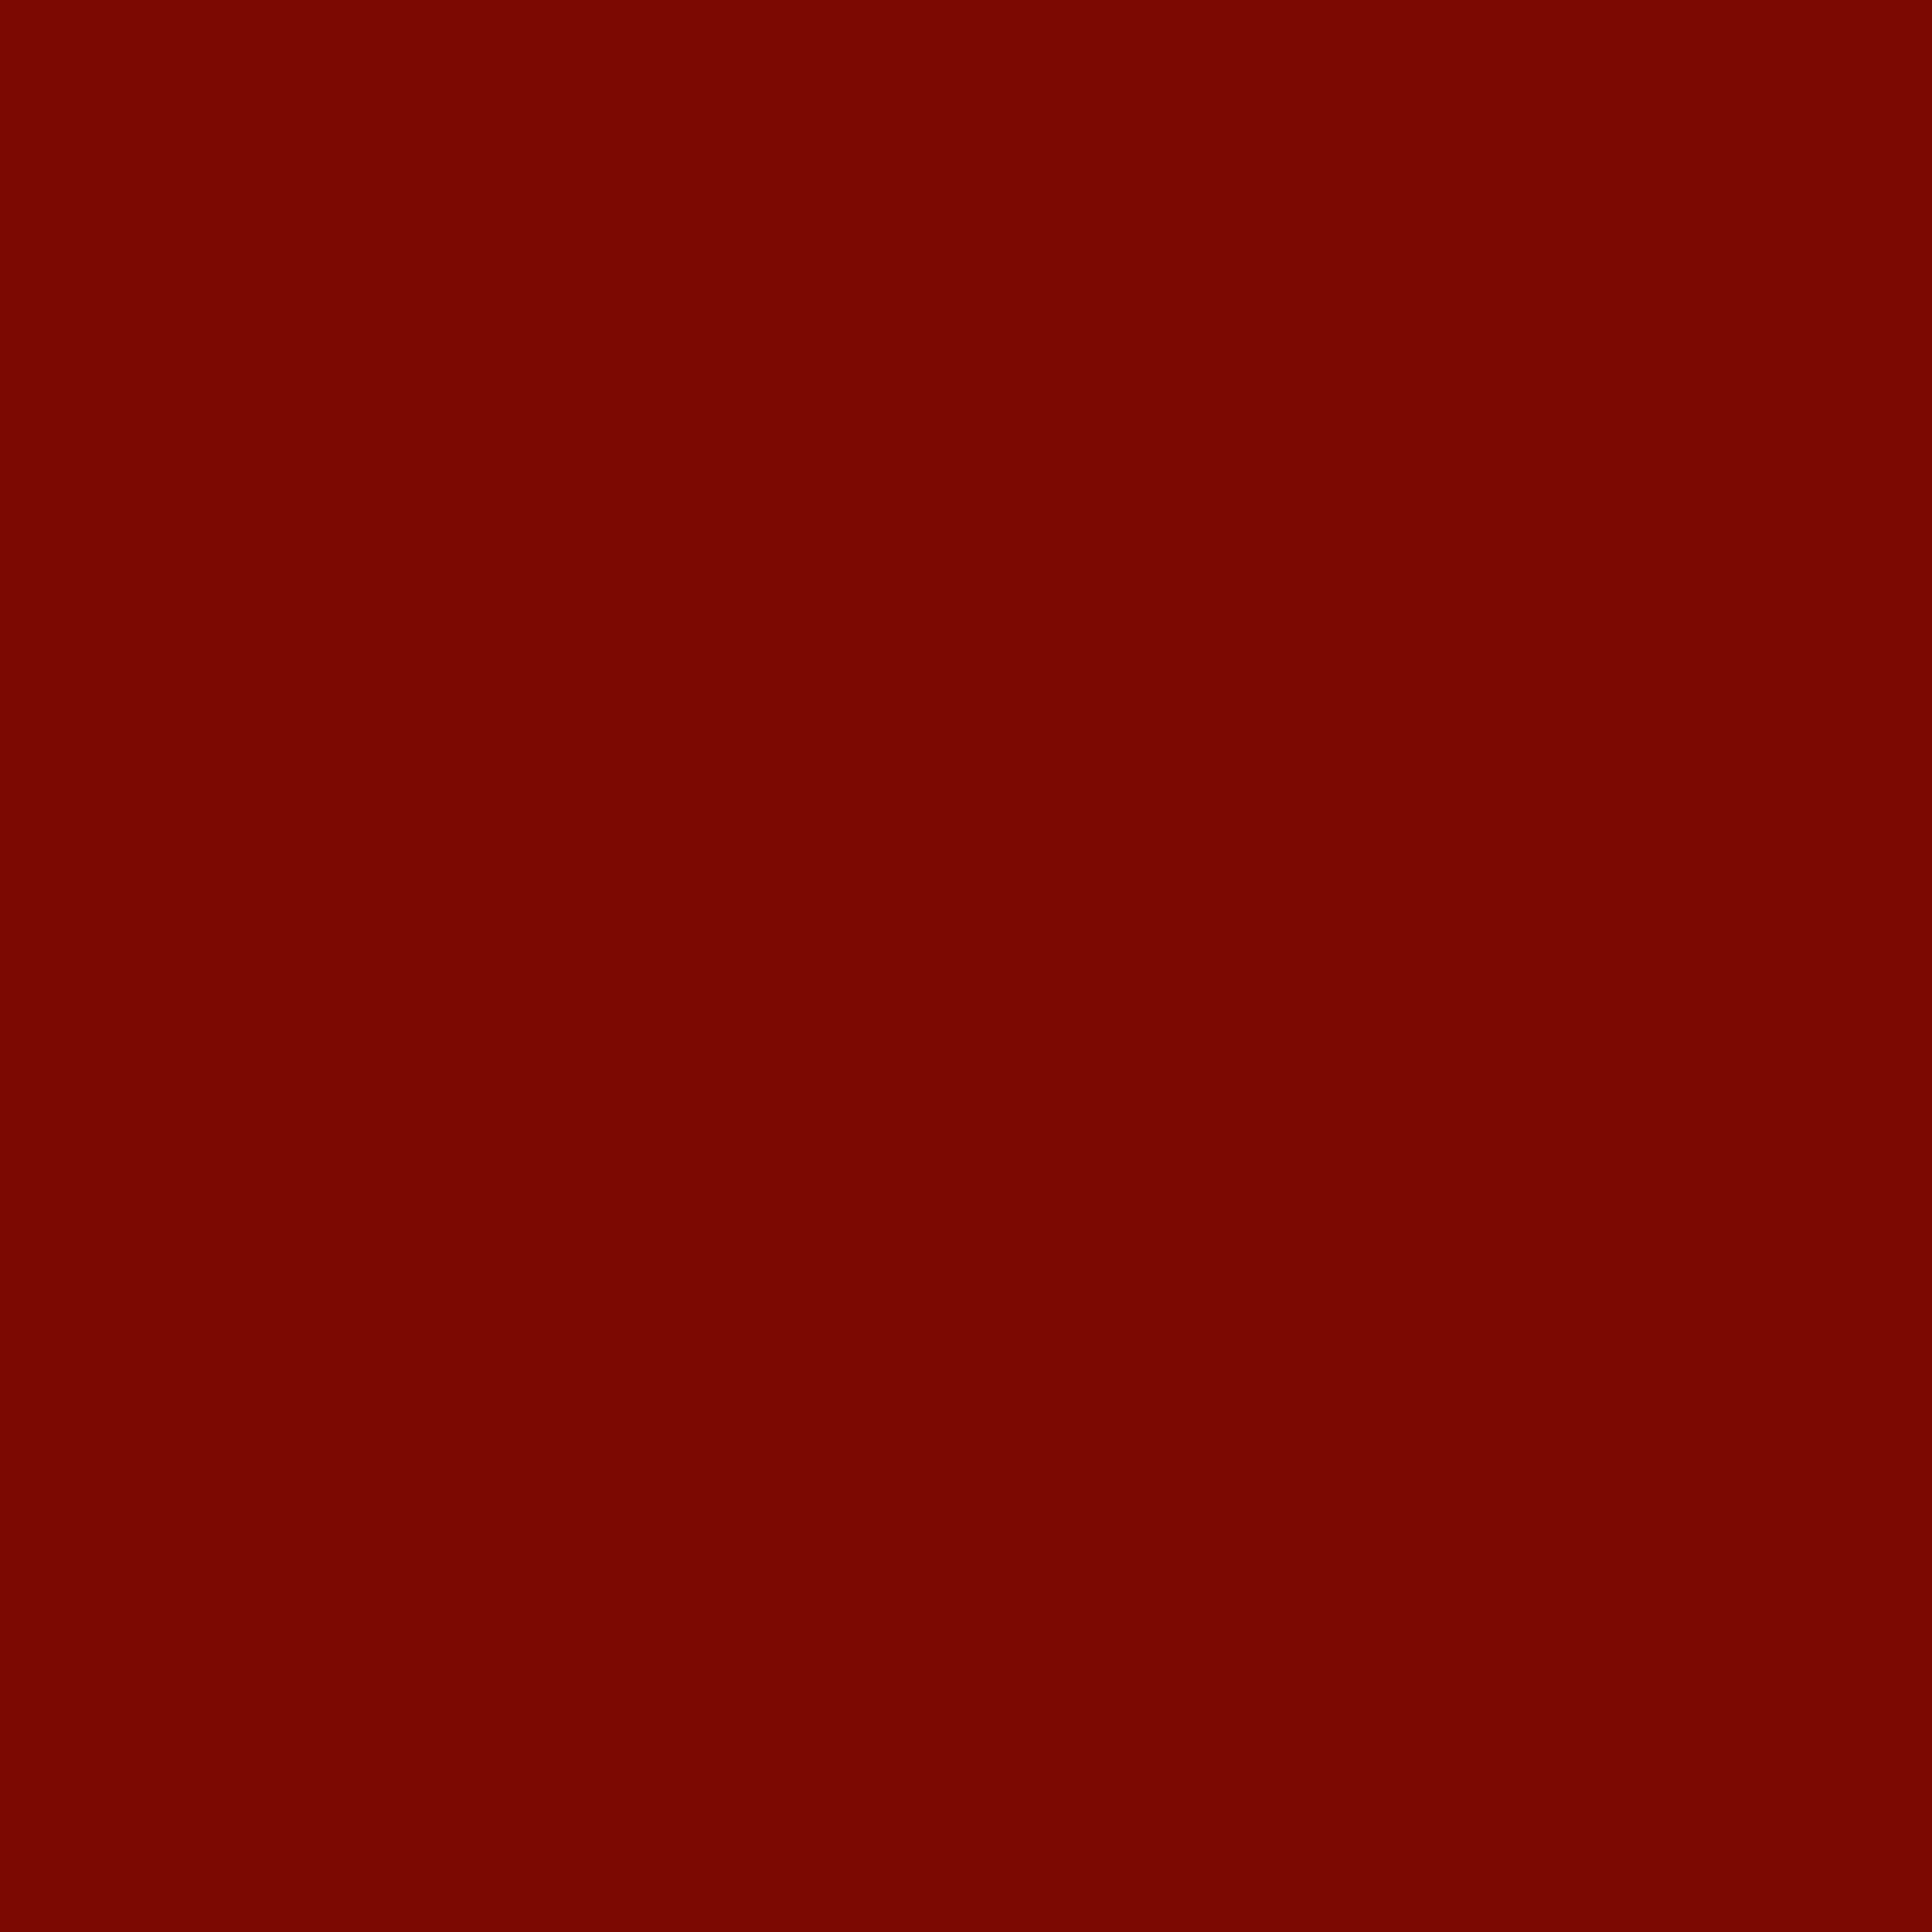 2732x2732 Barn Red Solid Color Background